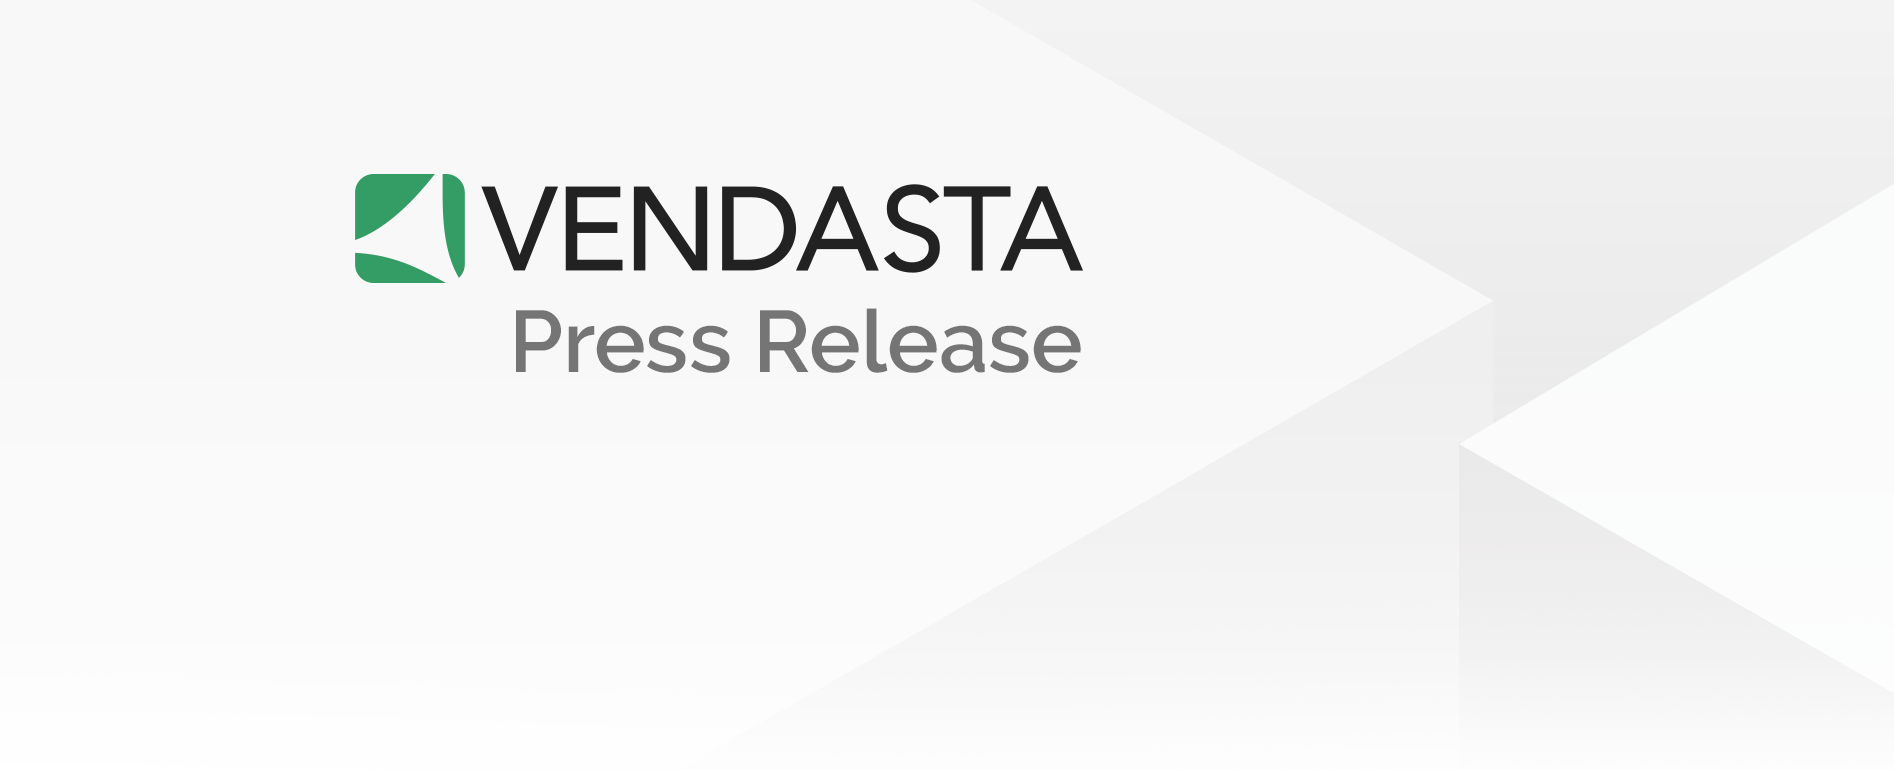 Vendasta awarded $3.3 million in federal funding to advance global expansion efforts